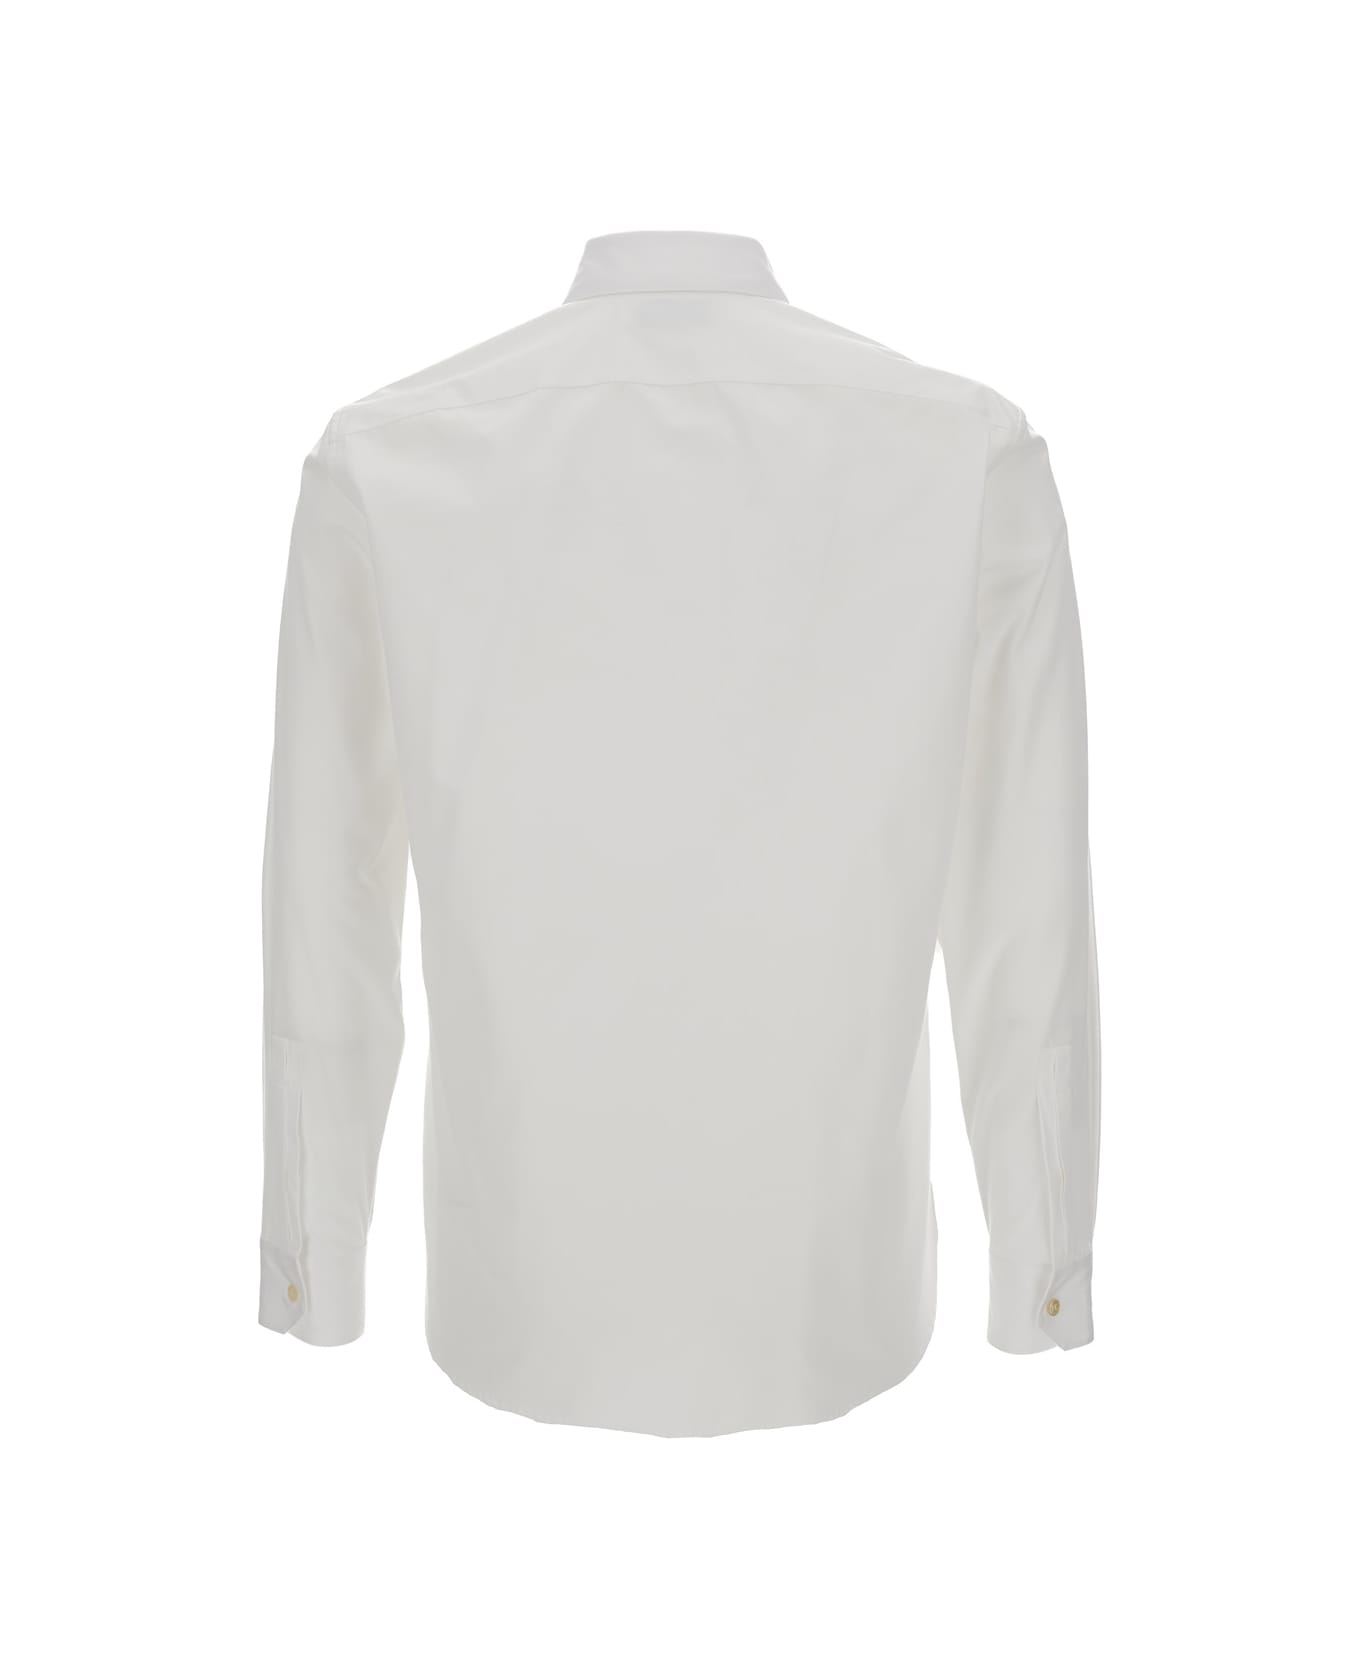 Saint Laurent White Pointed Collar Long Sleeve Shirt In Cotton Man - White